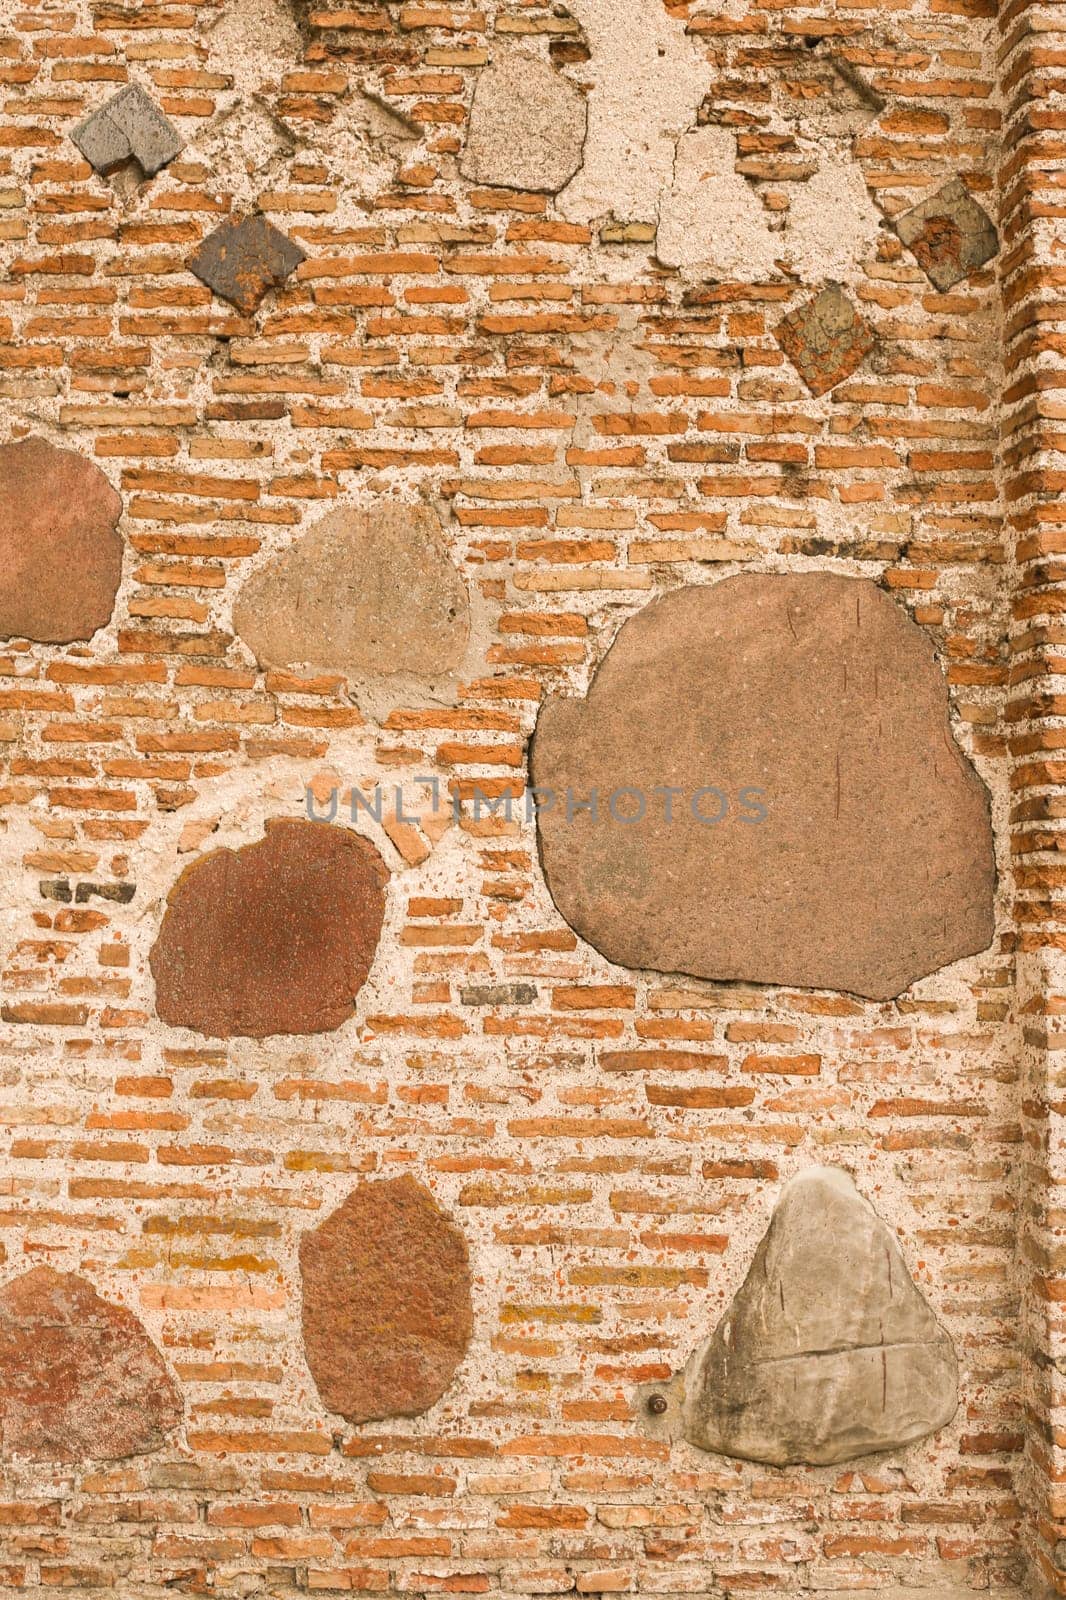 Medieval wall made of bricks and stone. Abstract background.